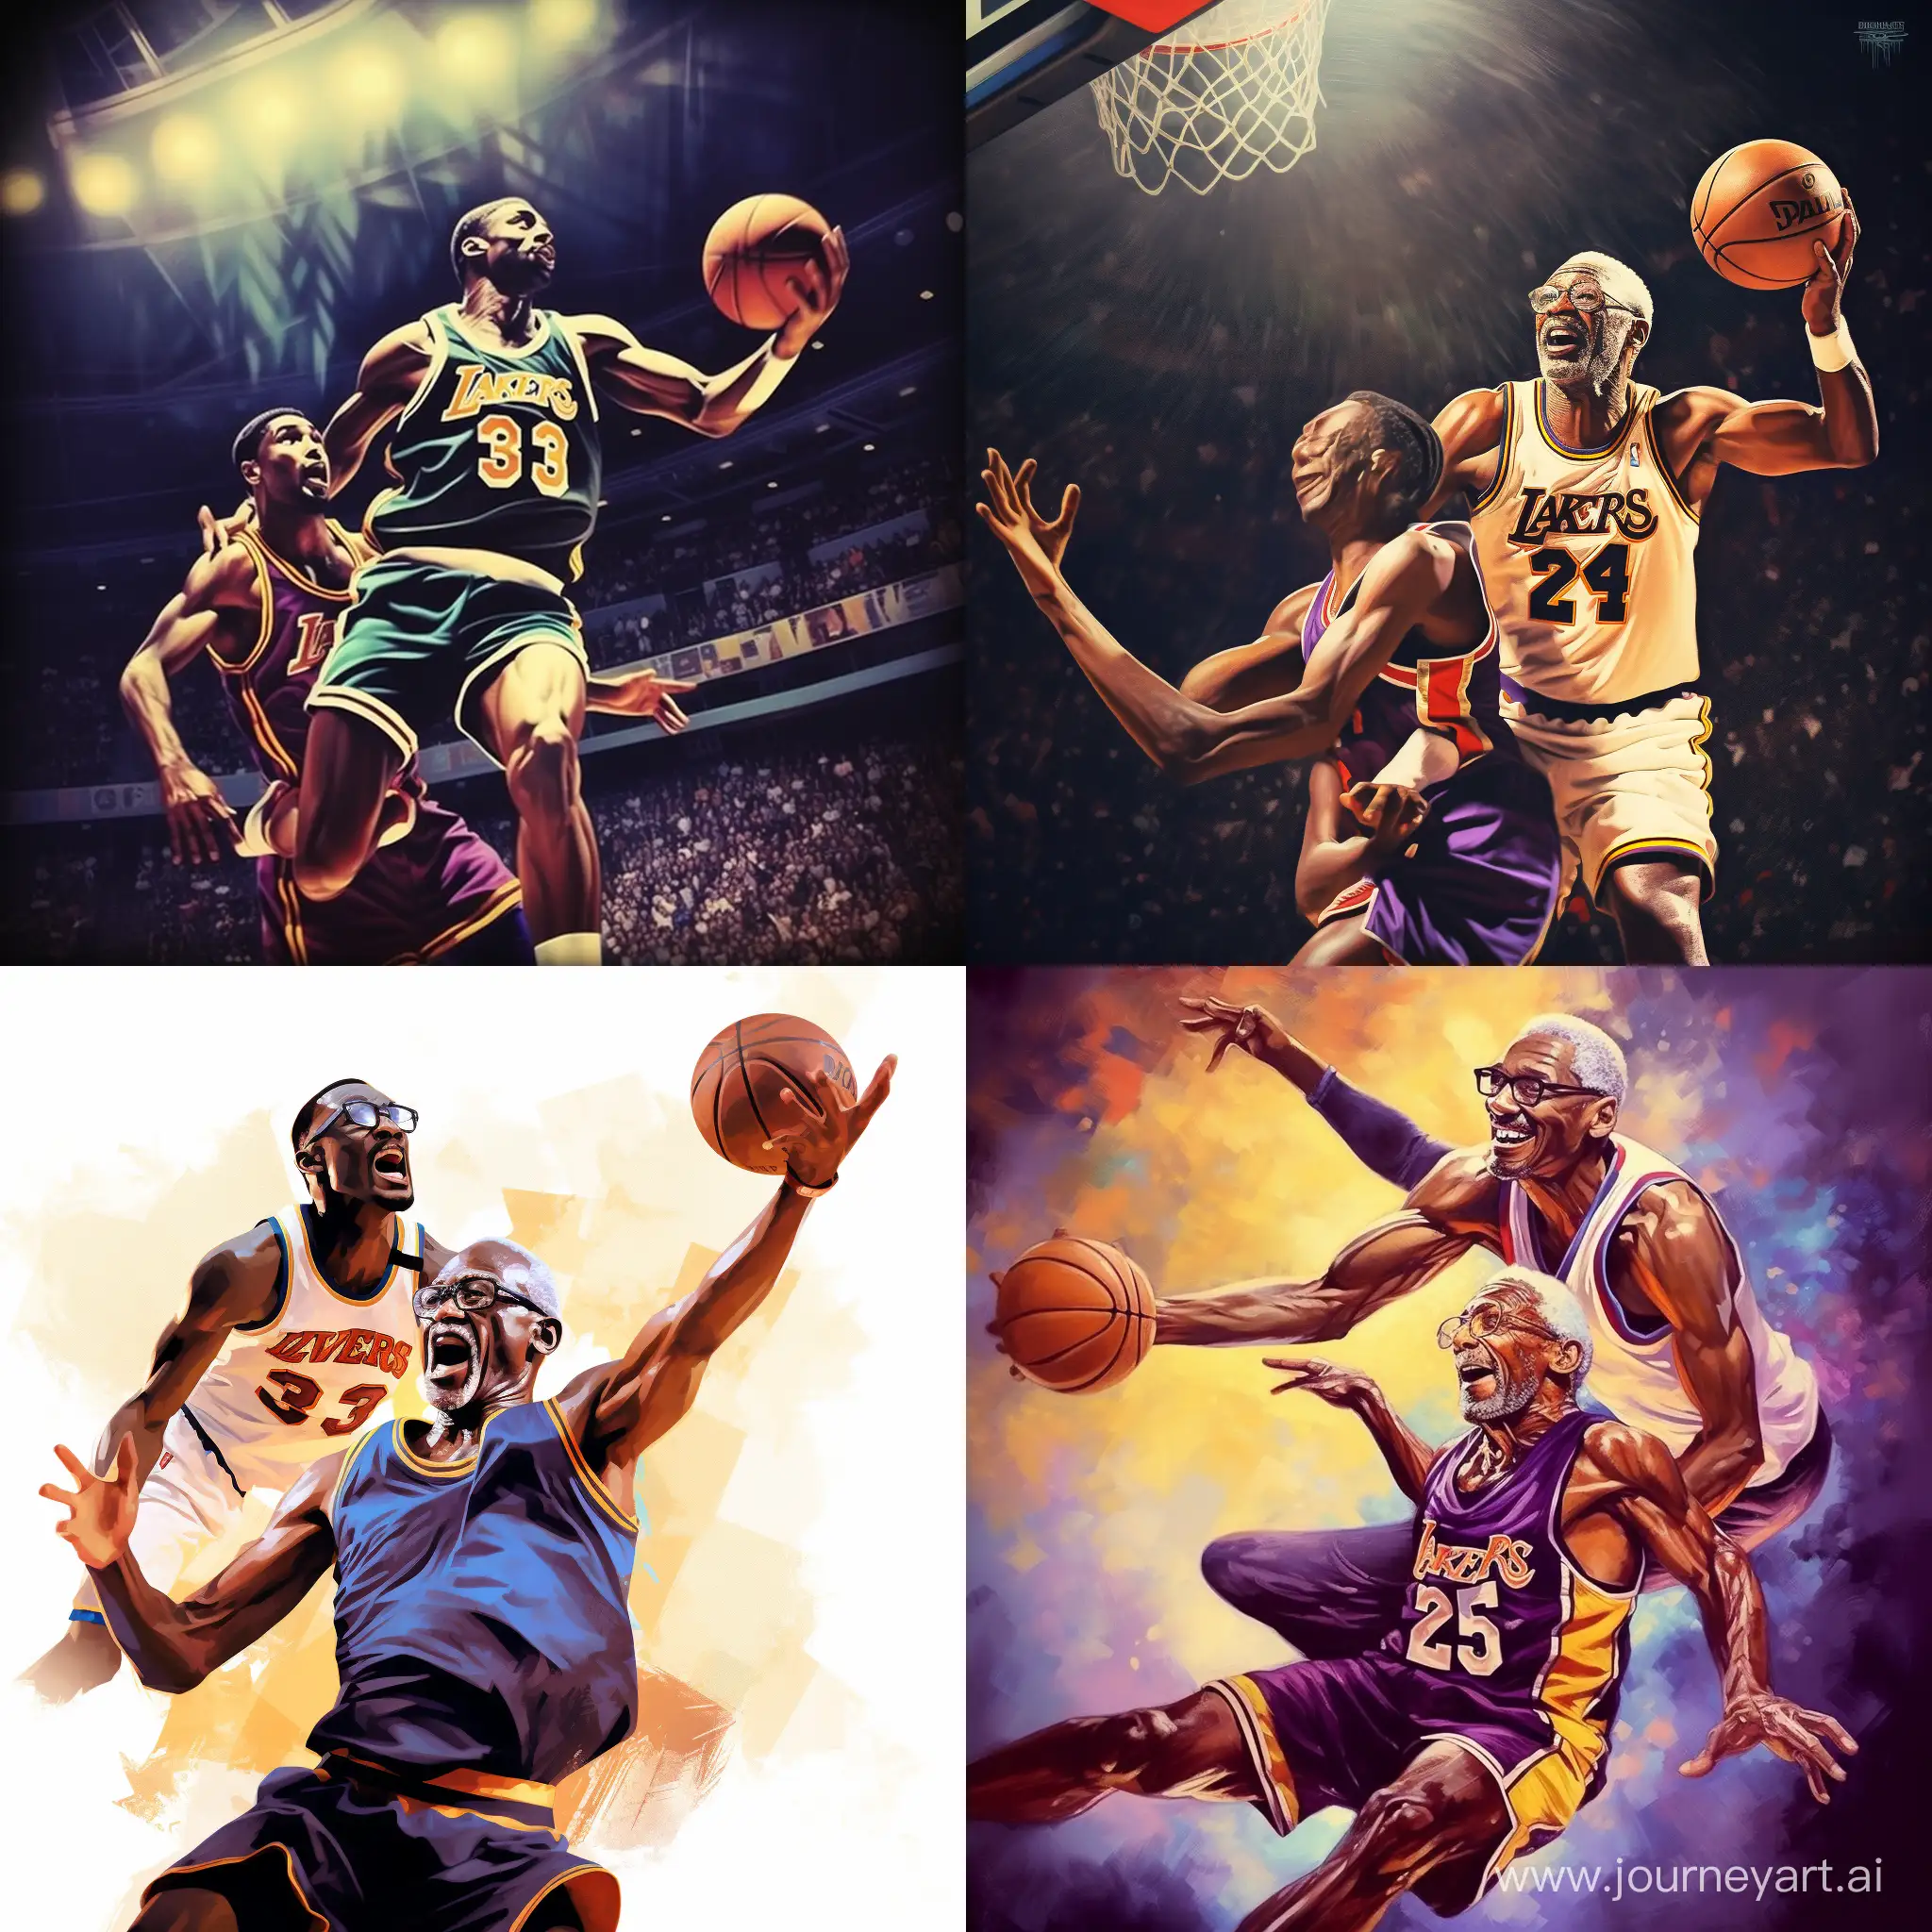 Kobe-Bryant-Dominates-with-a-Thunderous-Dunk-Over-Basketball-Legend-Bill-Russell